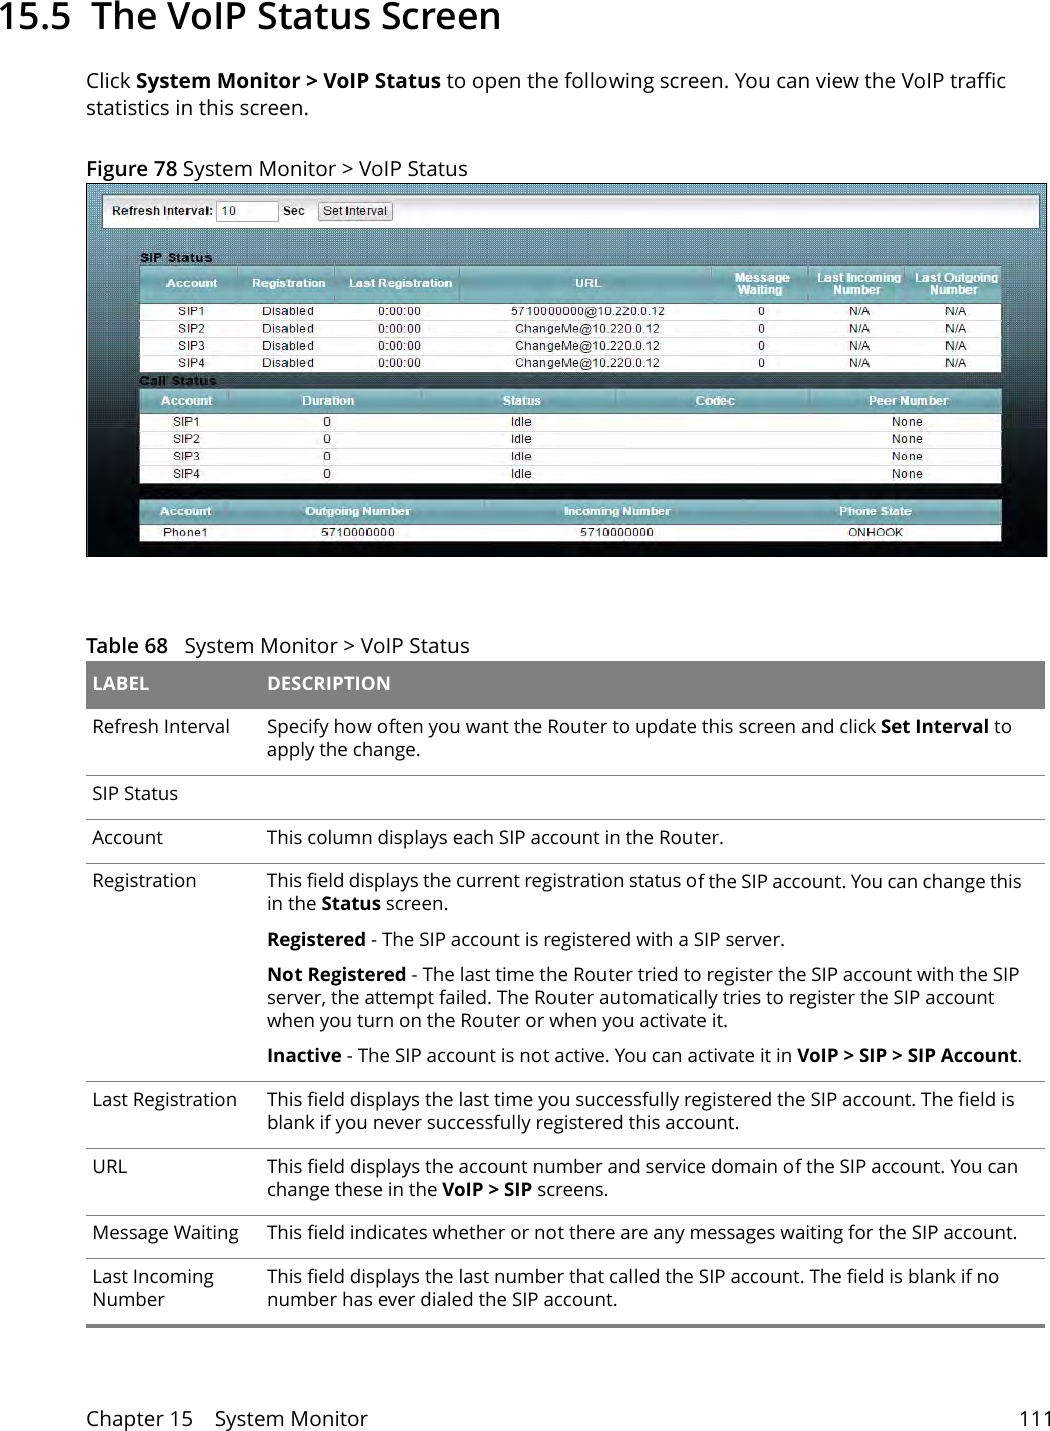 Chapter 15    System Monitor 11115.5  The VoIP Status Screen Click System Monitor &gt; VoIP Status to open the following screen. You can view the VoIP traffic statistics in this screen.Figure 78 System Monitor &gt; VoIP Status Table 68   System Monitor &gt; VoIP Status LABEL DESCRIPTIONRefresh Interval Specify how often you want the Router to update this screen and click Set Interval to apply the change. SIP StatusAccount This column displays each SIP account in the Router.Registration This field displays the current registration status of the SIP account. You can change this in the Status screen.Registered - The SIP account is registered with a SIP server.Not Registered - The last time the Router tried to register the SIP account with the SIP server, the attempt failed. The Router automatically tries to register the SIP account when you turn on the Router or when you activate it.Inactive - The SIP account is not active. You can activate it in VoIP &gt; SIP &gt; SIP Account.Last Registration This field displays the last time you successfully registered the SIP account. The field is blank if you never successfully registered this account.URL This field displays the account number and service domain of the SIP account. You can change these in the VoIP &gt; SIP screens.Message Waiting This field indicates whether or not there are any messages waiting for the SIP account.Last Incoming NumberThis field displays the last number that called the SIP account. The field is blank if no number has ever dialed the SIP account.